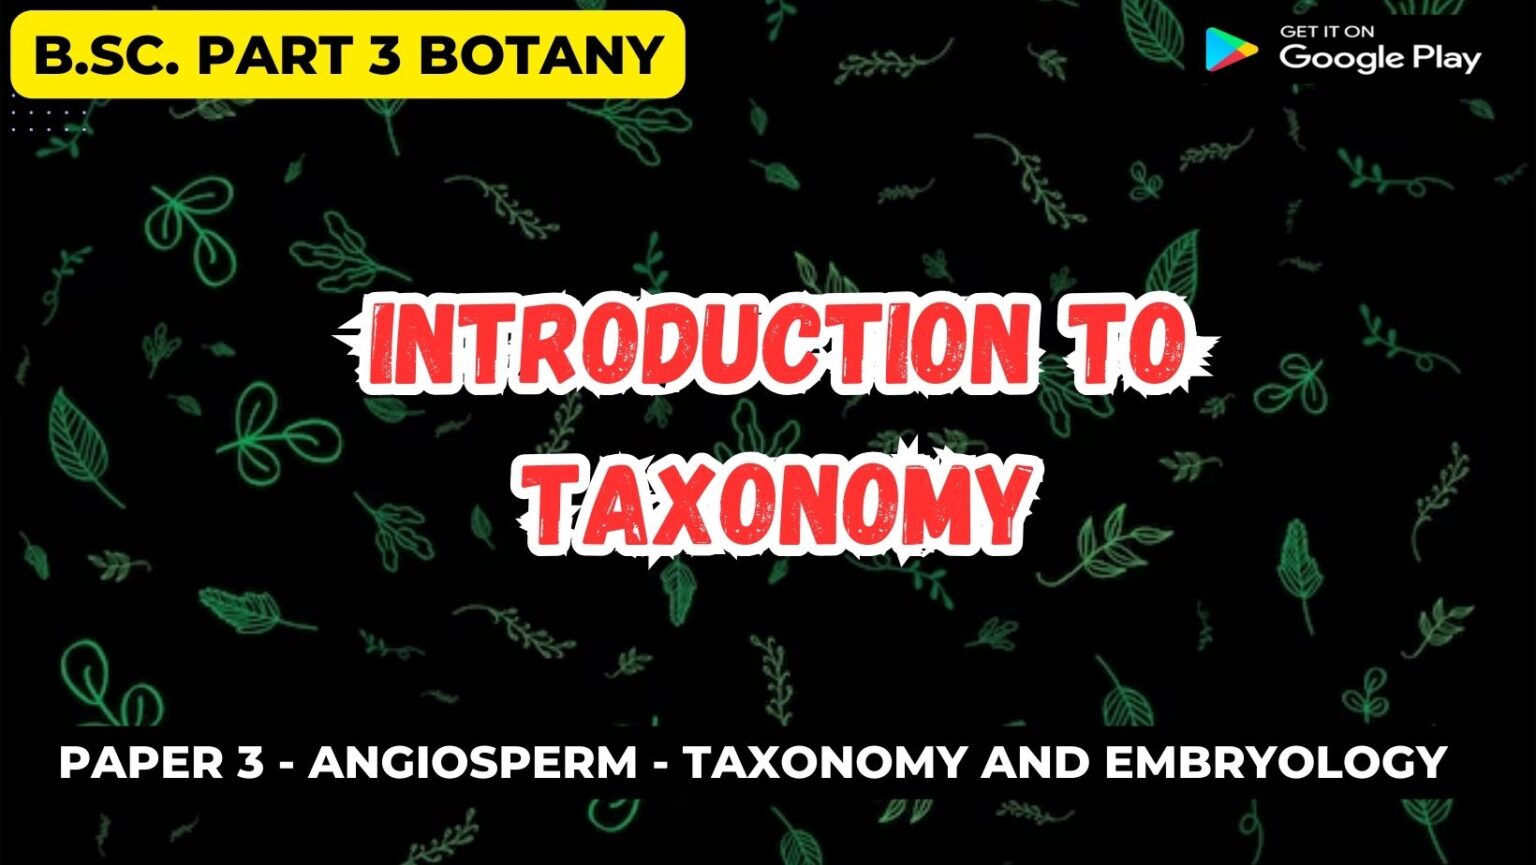 Introduction to taxonomy